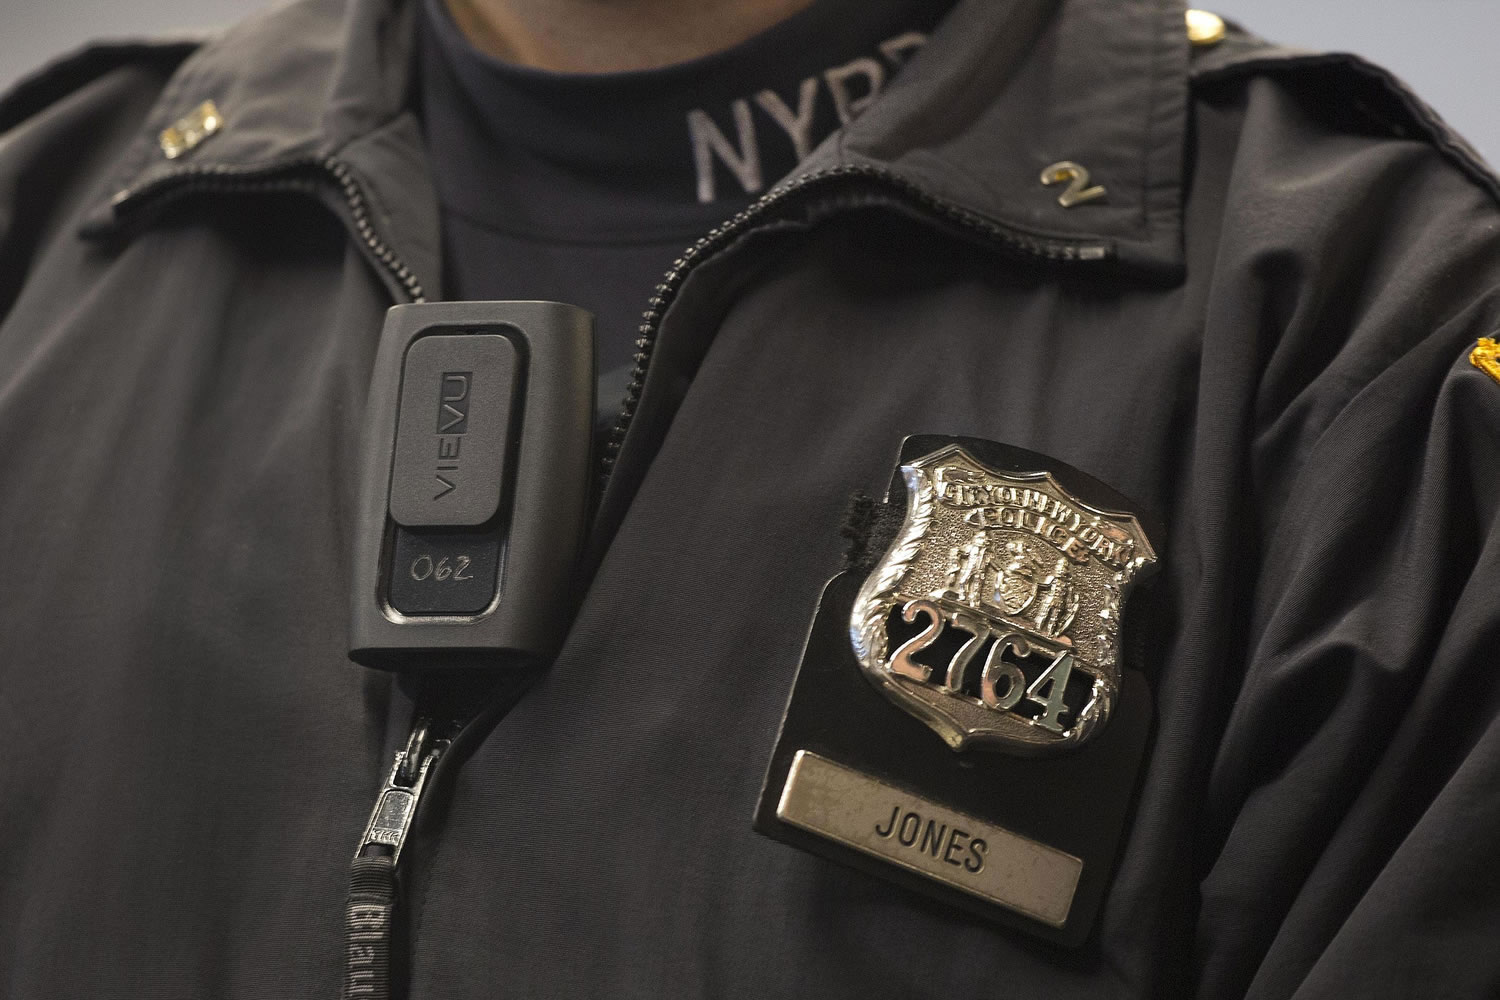 New York Police Department Officer Joshua Jones wears a VieVu body camera on his chest during a news conference in New York.